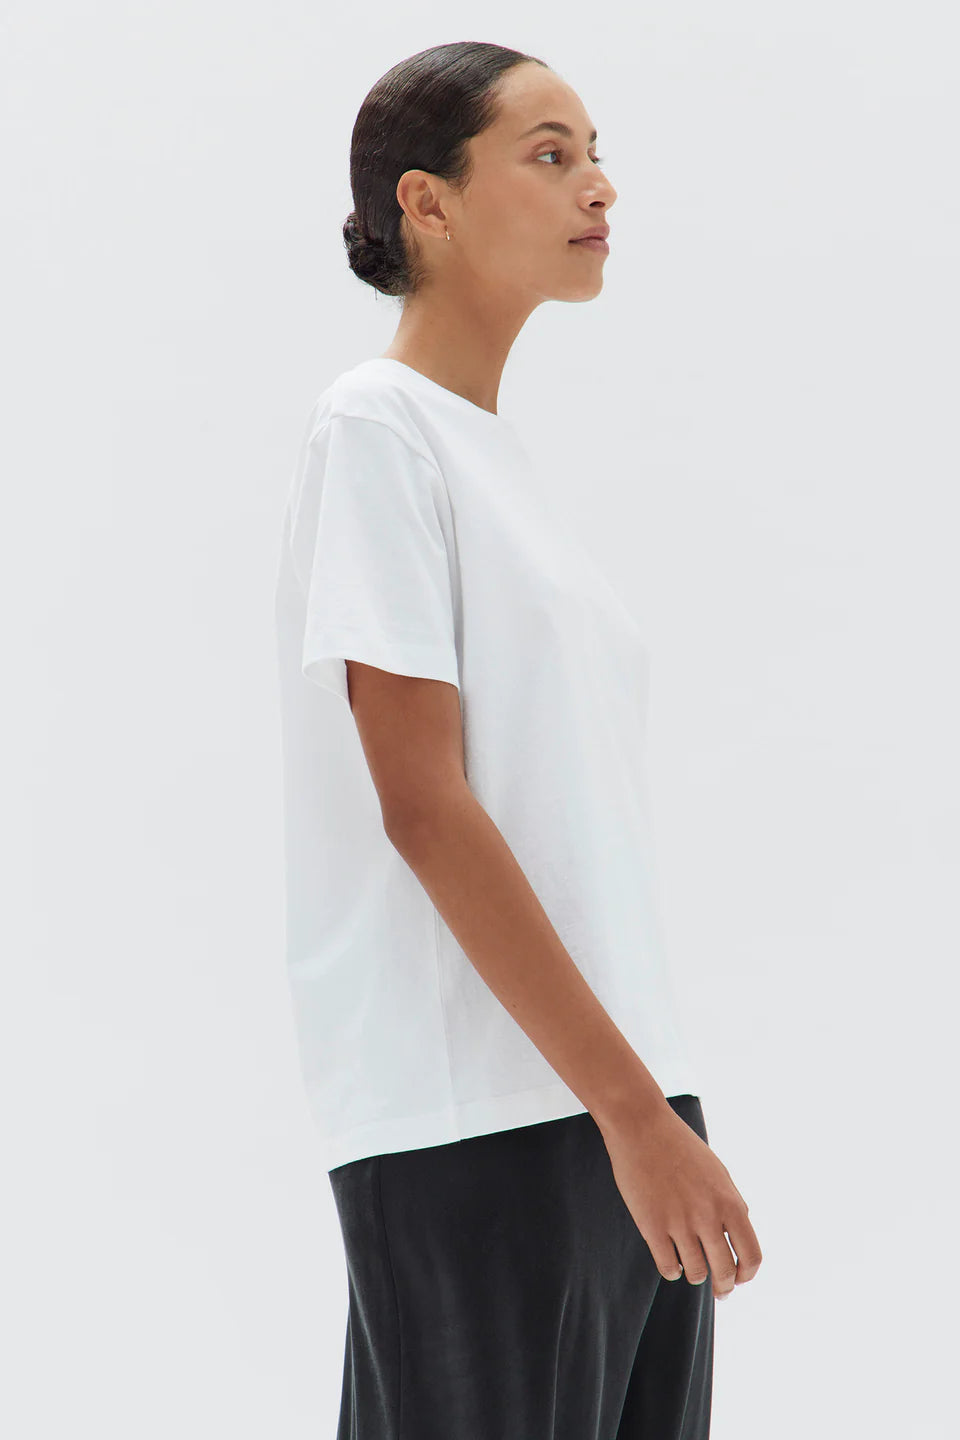 ASSEMBLY LABEL - Organic Base Tee - White